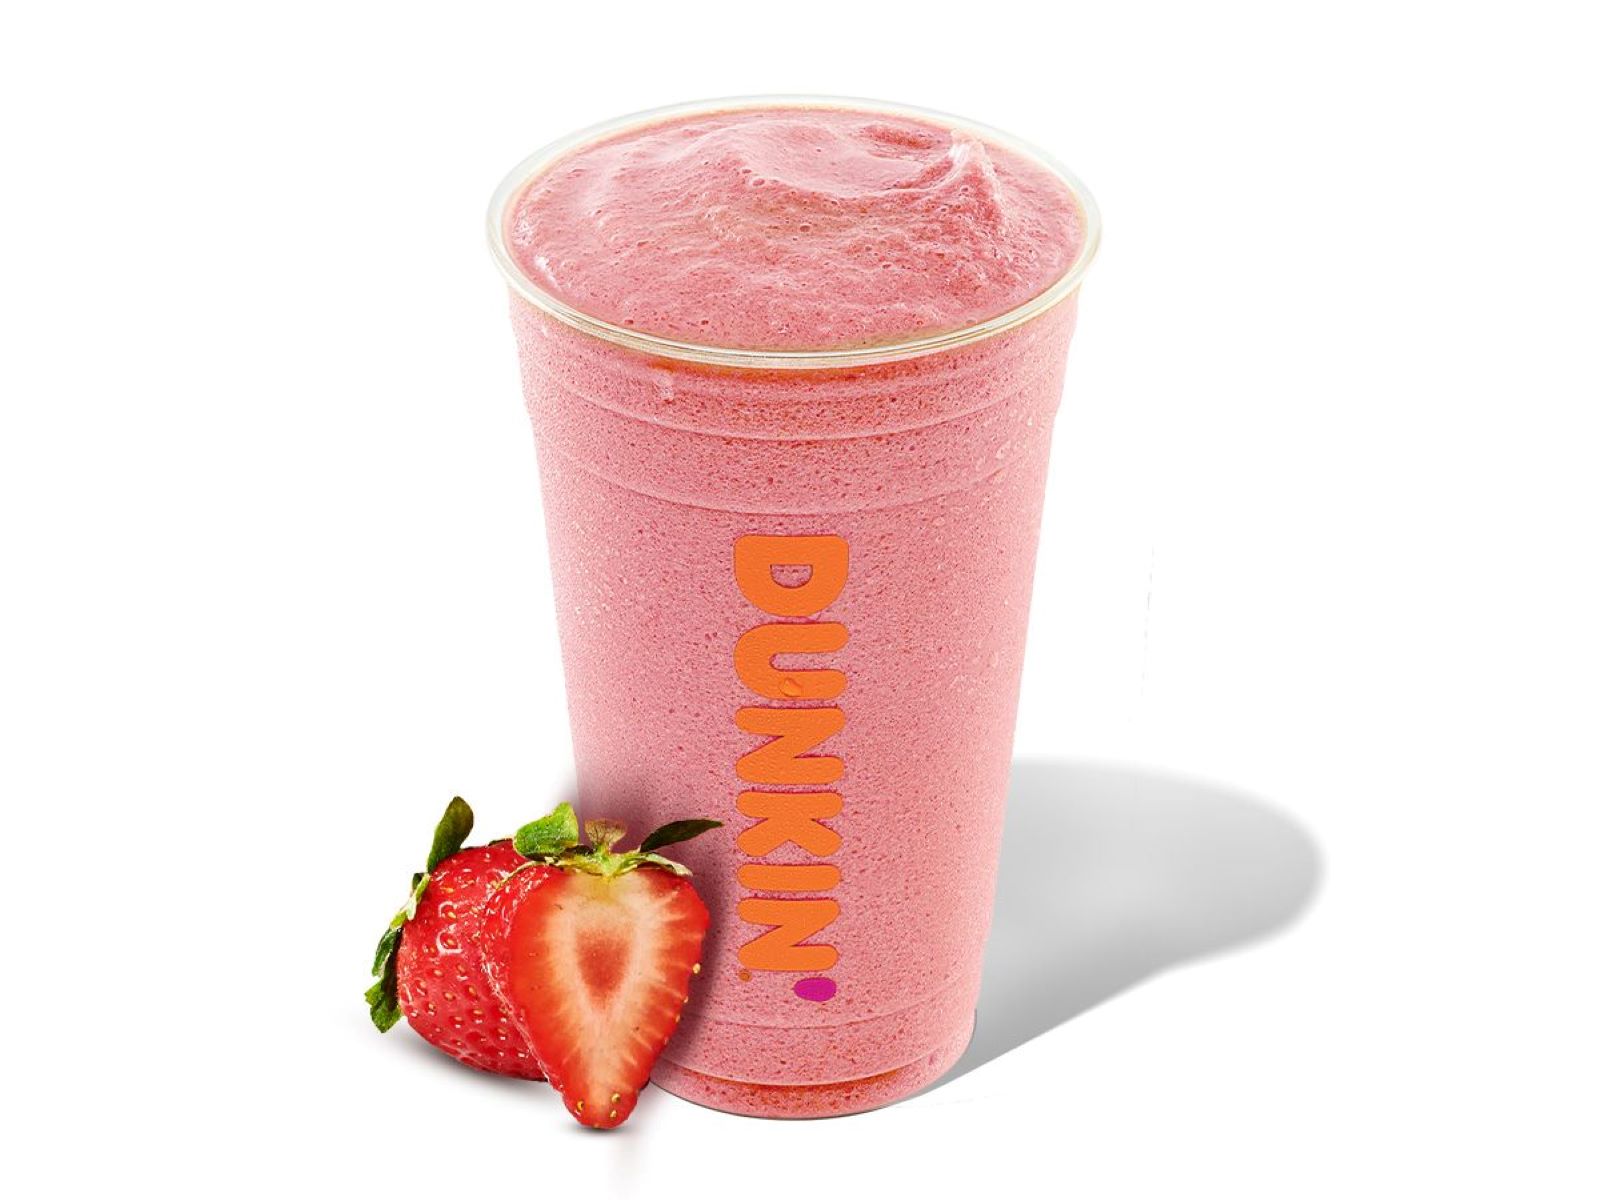 18-dunkin-donuts-smoothie-nutrition-facts